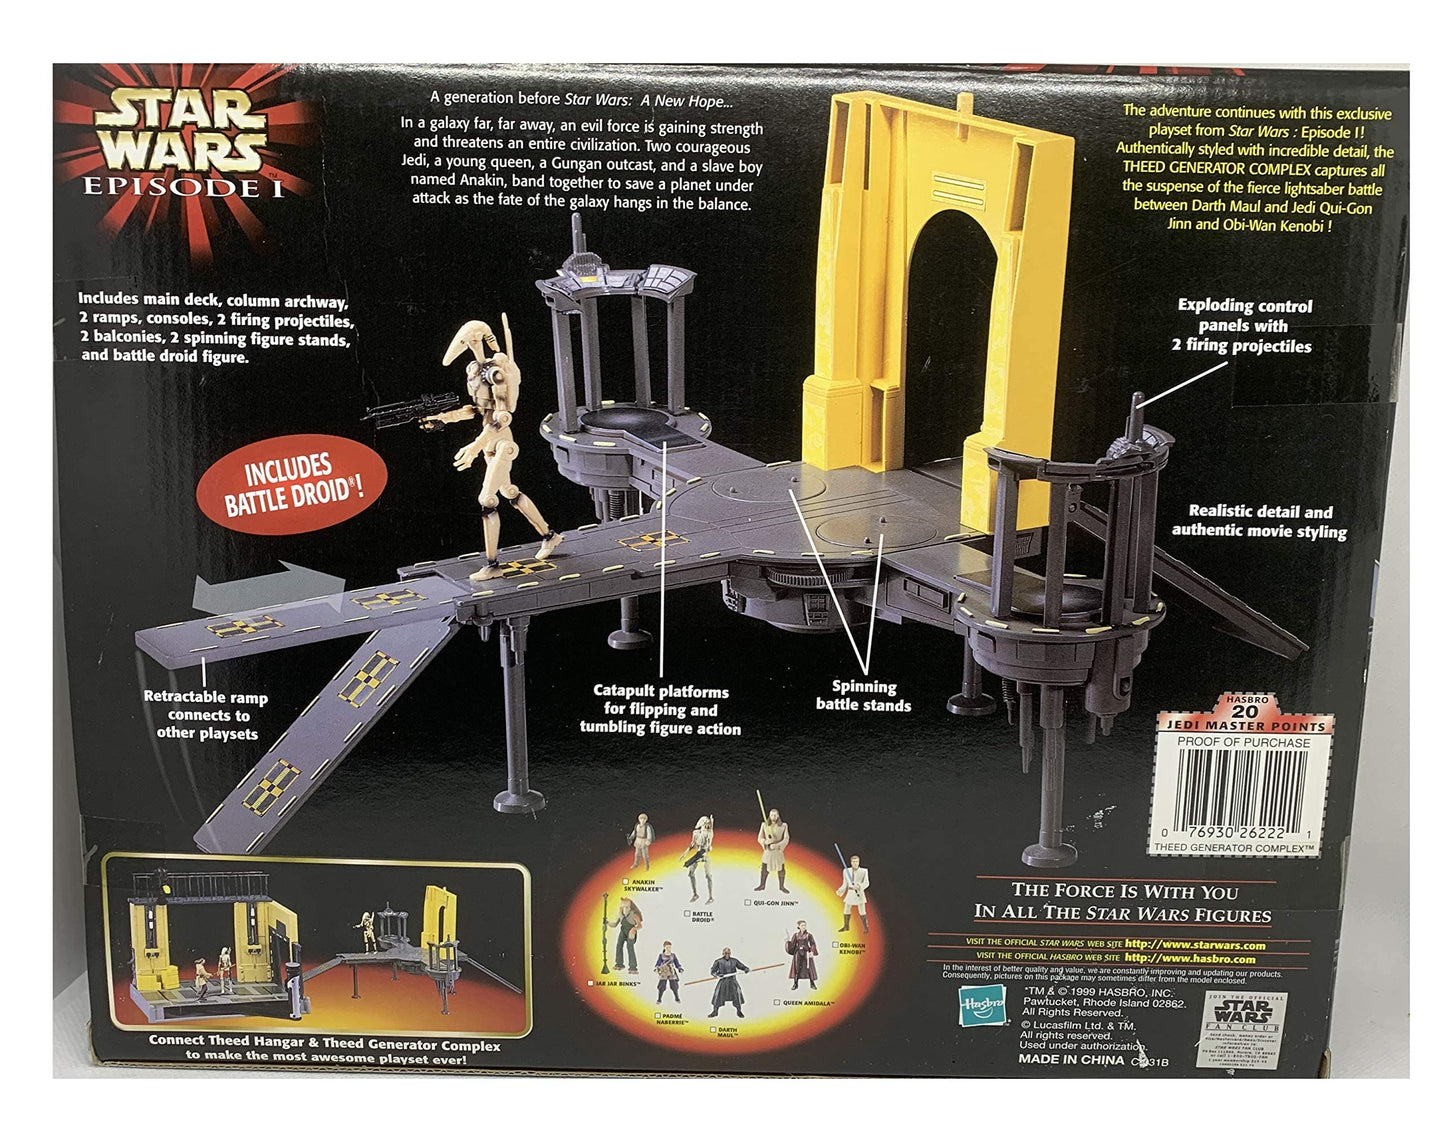 Vintage Star Wars 1999 Episode 1 Theed Generator Complex Playset With Battle Droid Action Figure - Brand New Factory Sealed Shop Stock Room Find